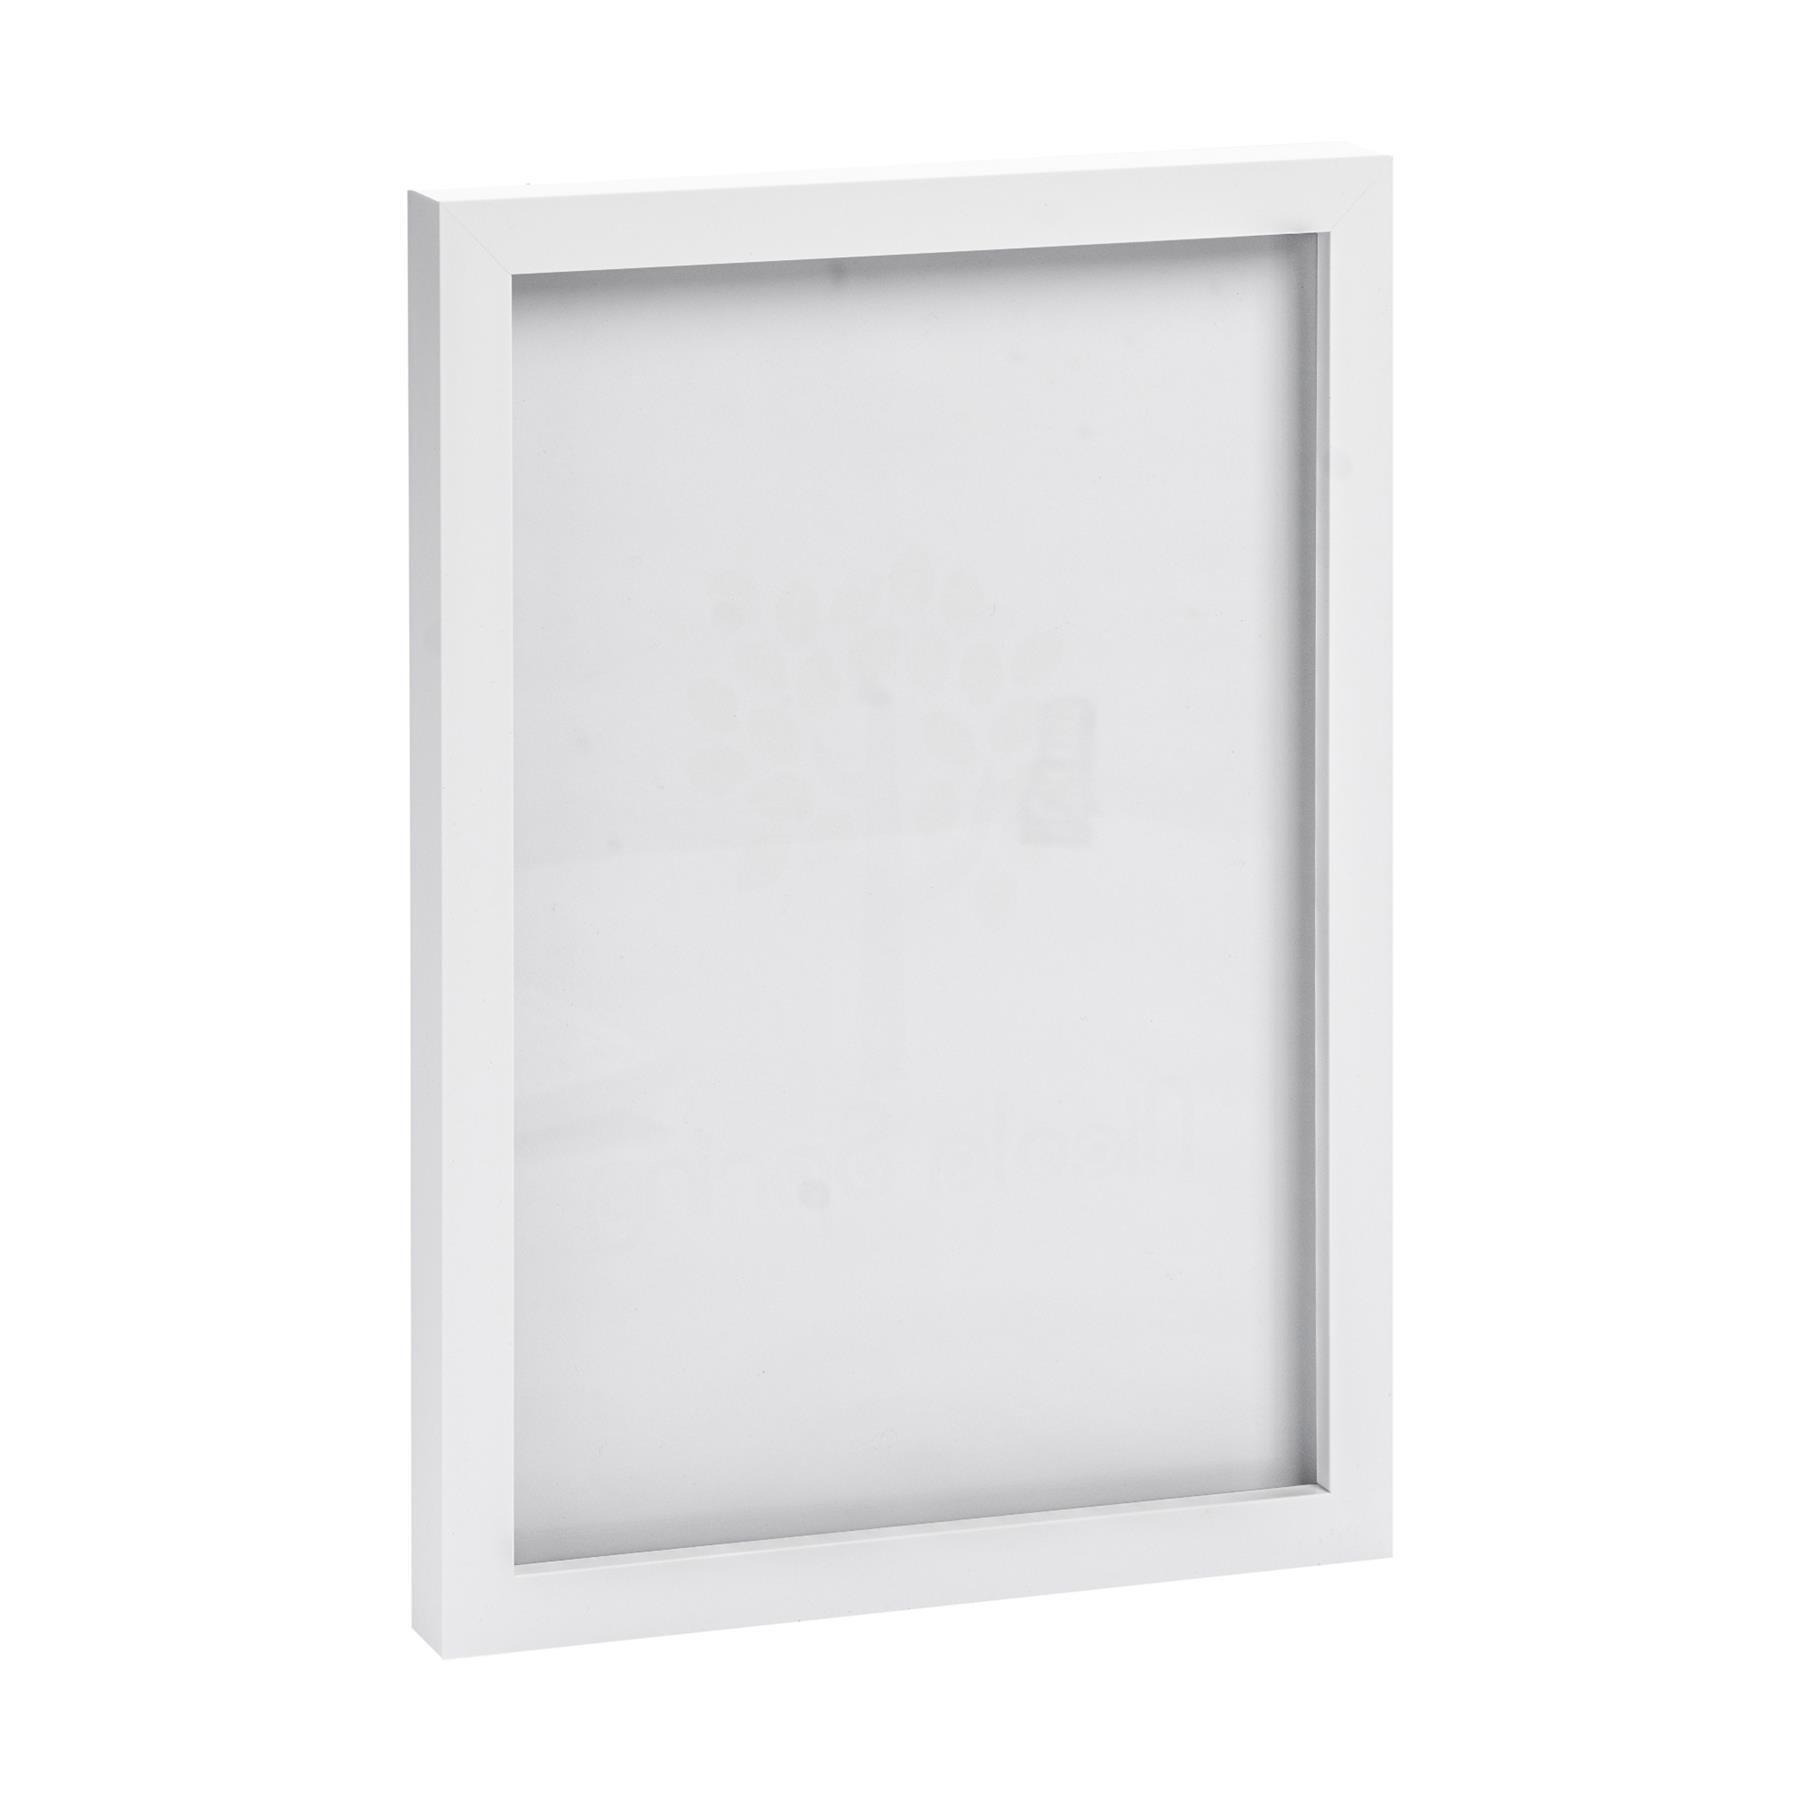 "Photo Frame - A4 (8x12"") - Pack of 1" - image 1